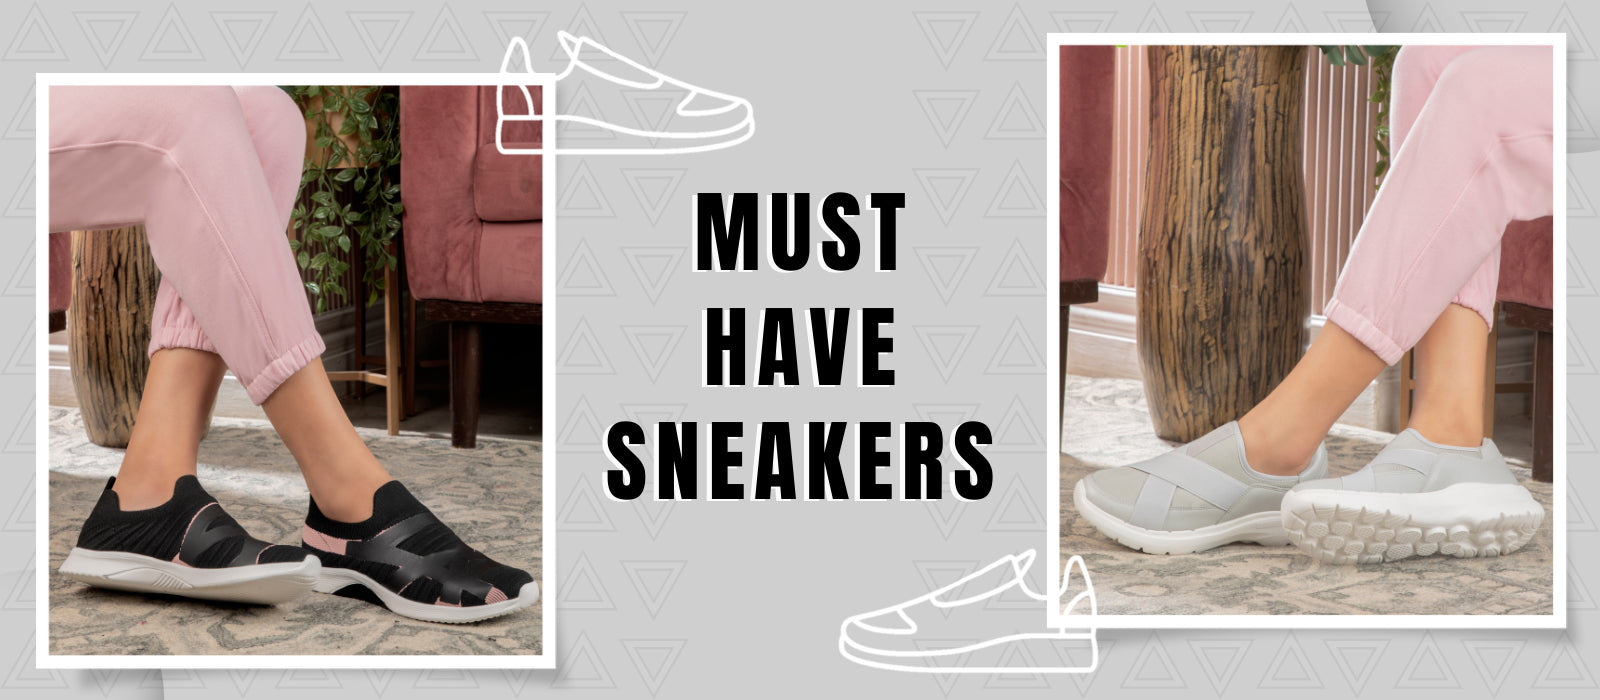 How to style women’s sneakers for every occasion